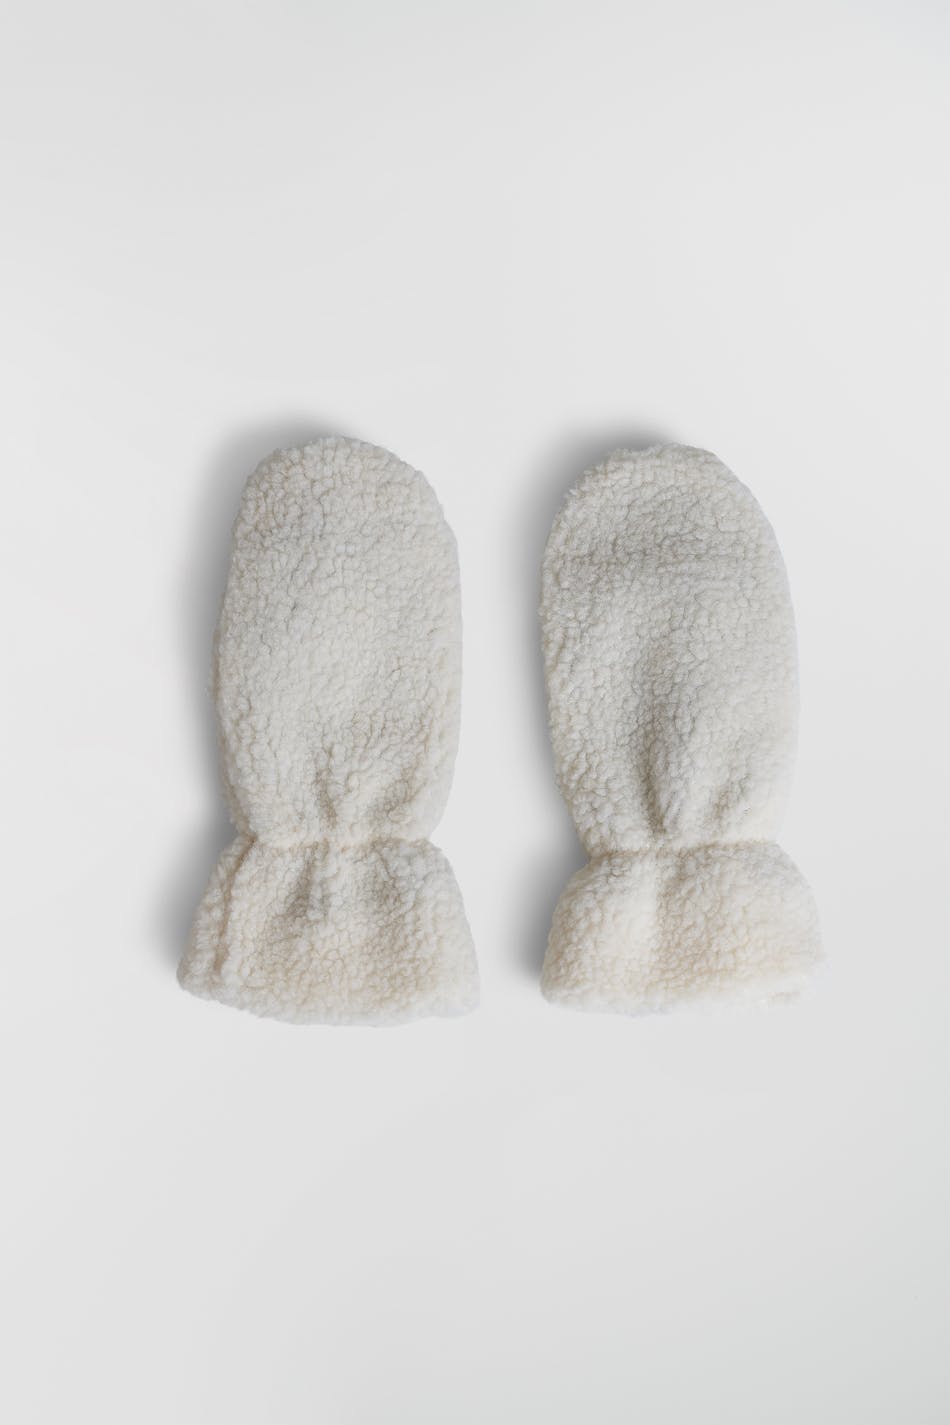 Teddy mittens, Gina Tricot